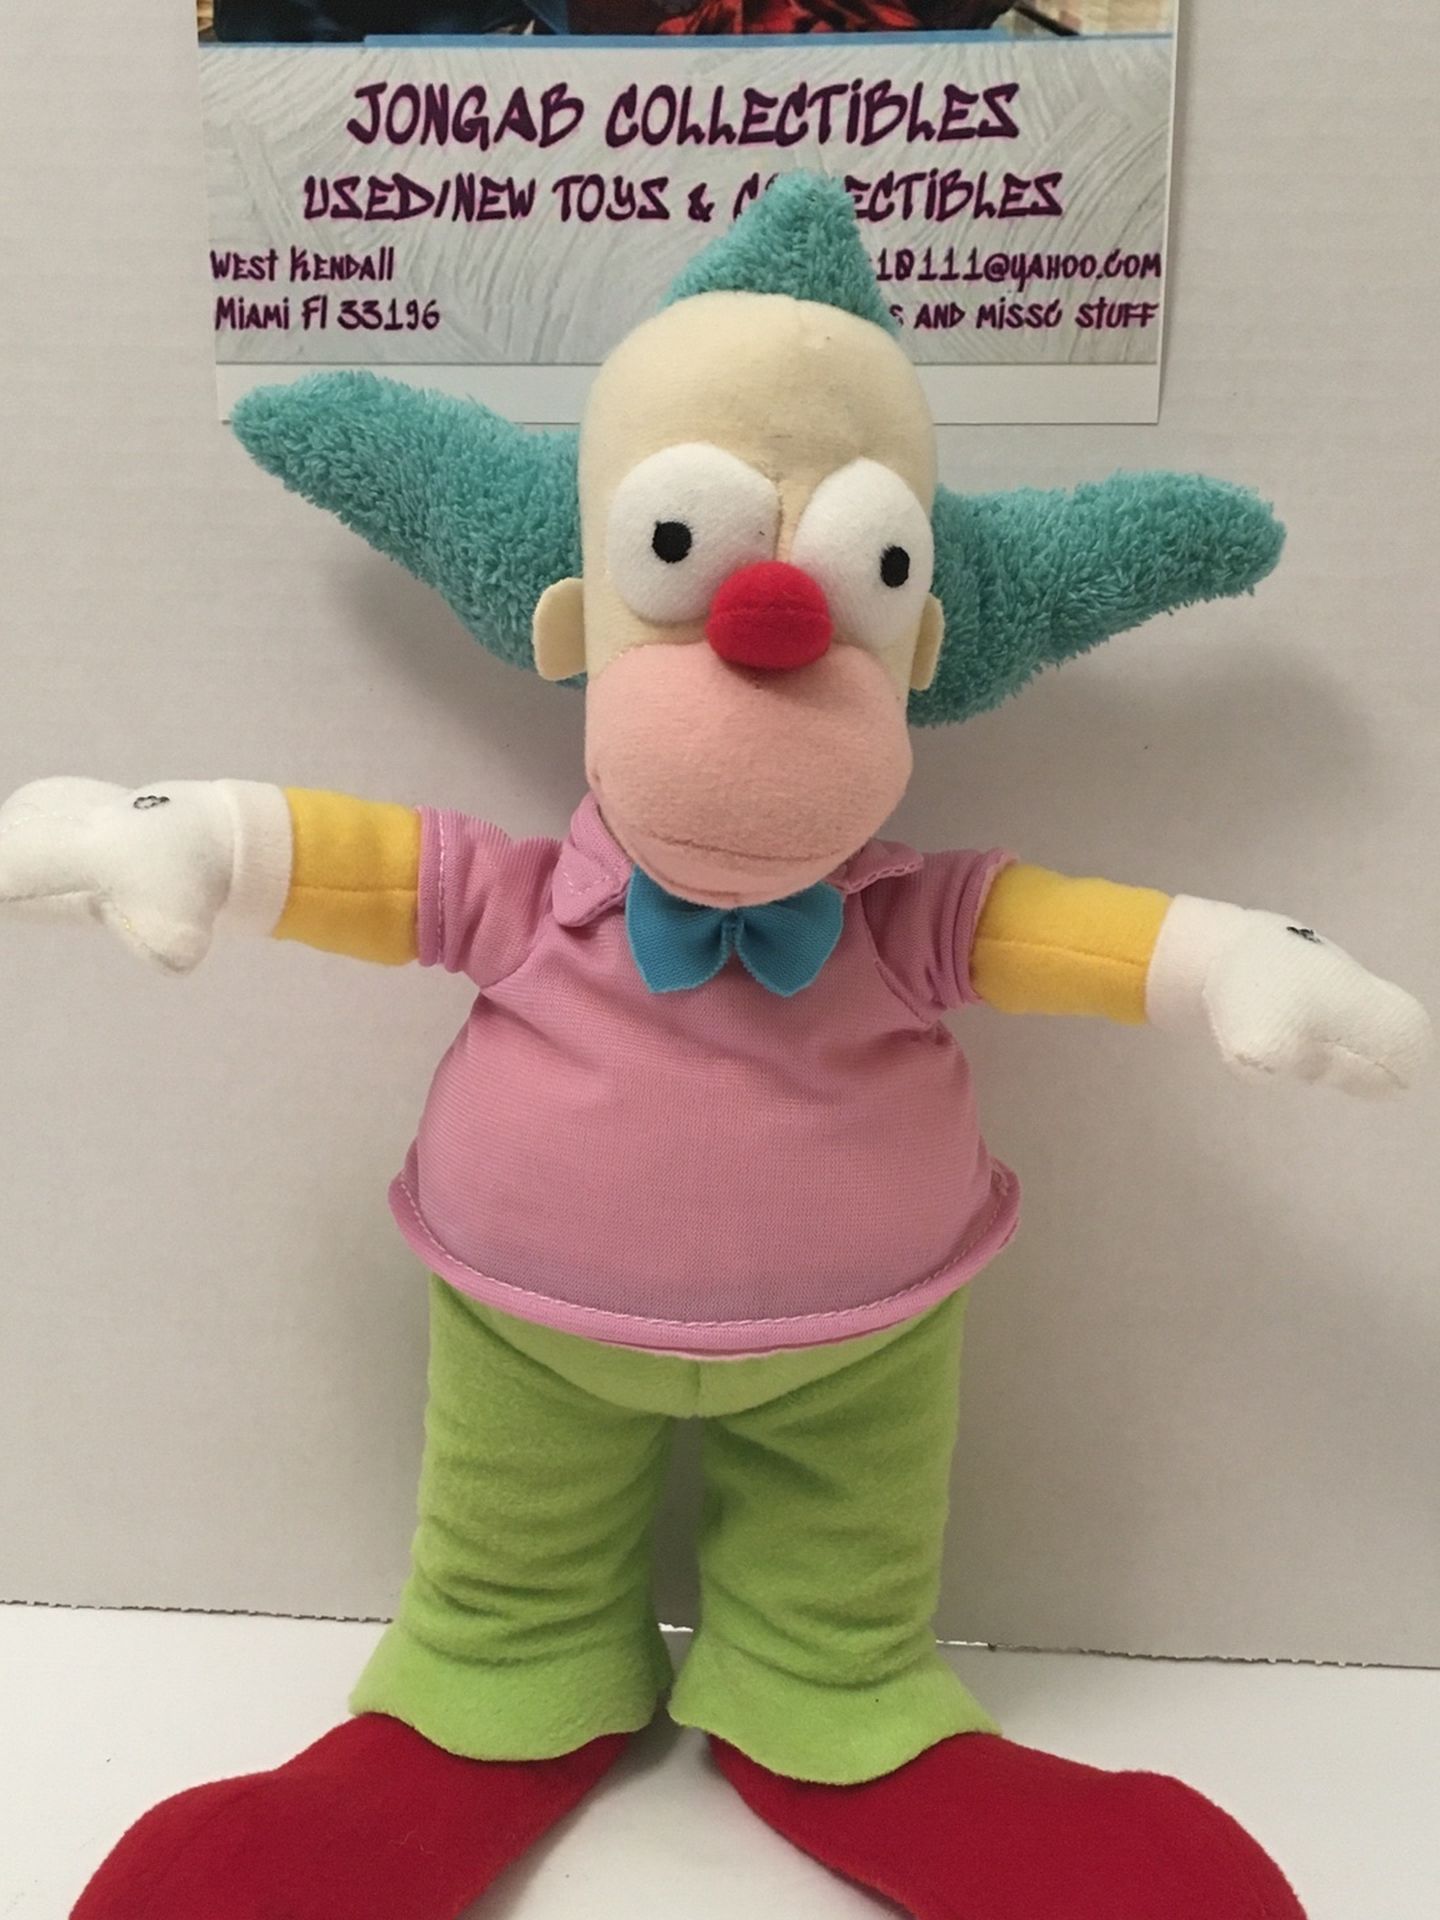 The Simpsons Krusty The Clown (12”)